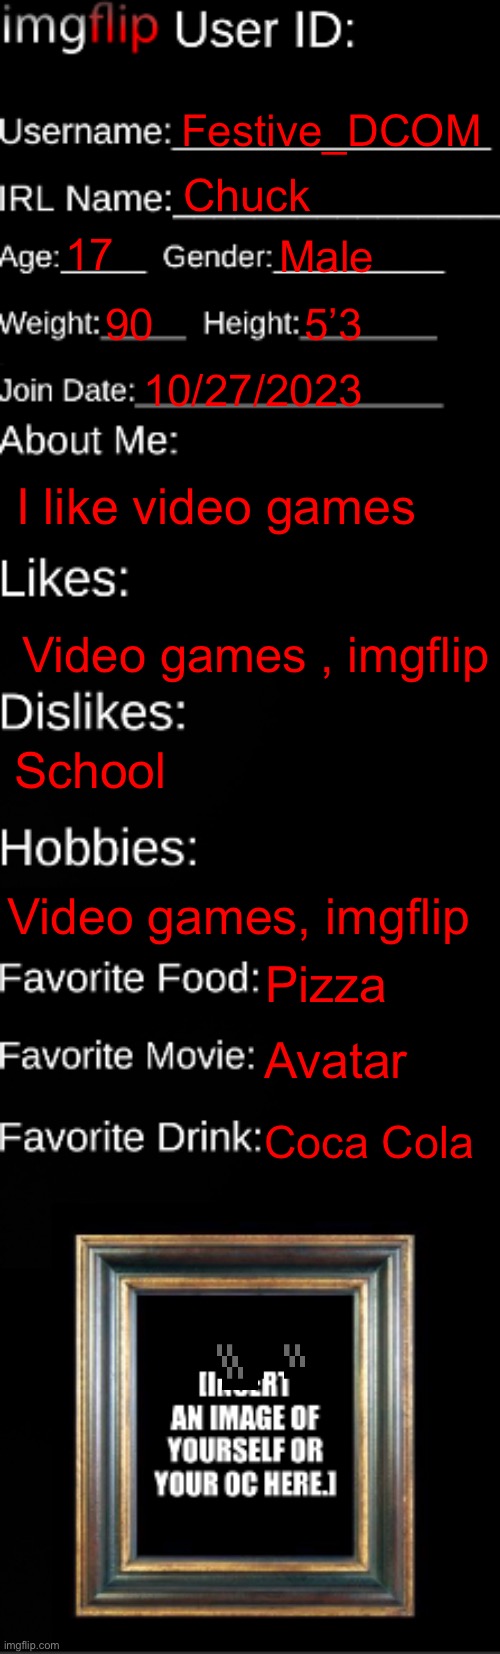 Me | Festive_DCOM; Chuck; 17; Male; 90; 5’3; 10/27/2023; I like video games; Video games , imgflip; School; Video games, imgflip; Pizza; Avatar; Coca Cola | image tagged in imgflip id card | made w/ Imgflip meme maker